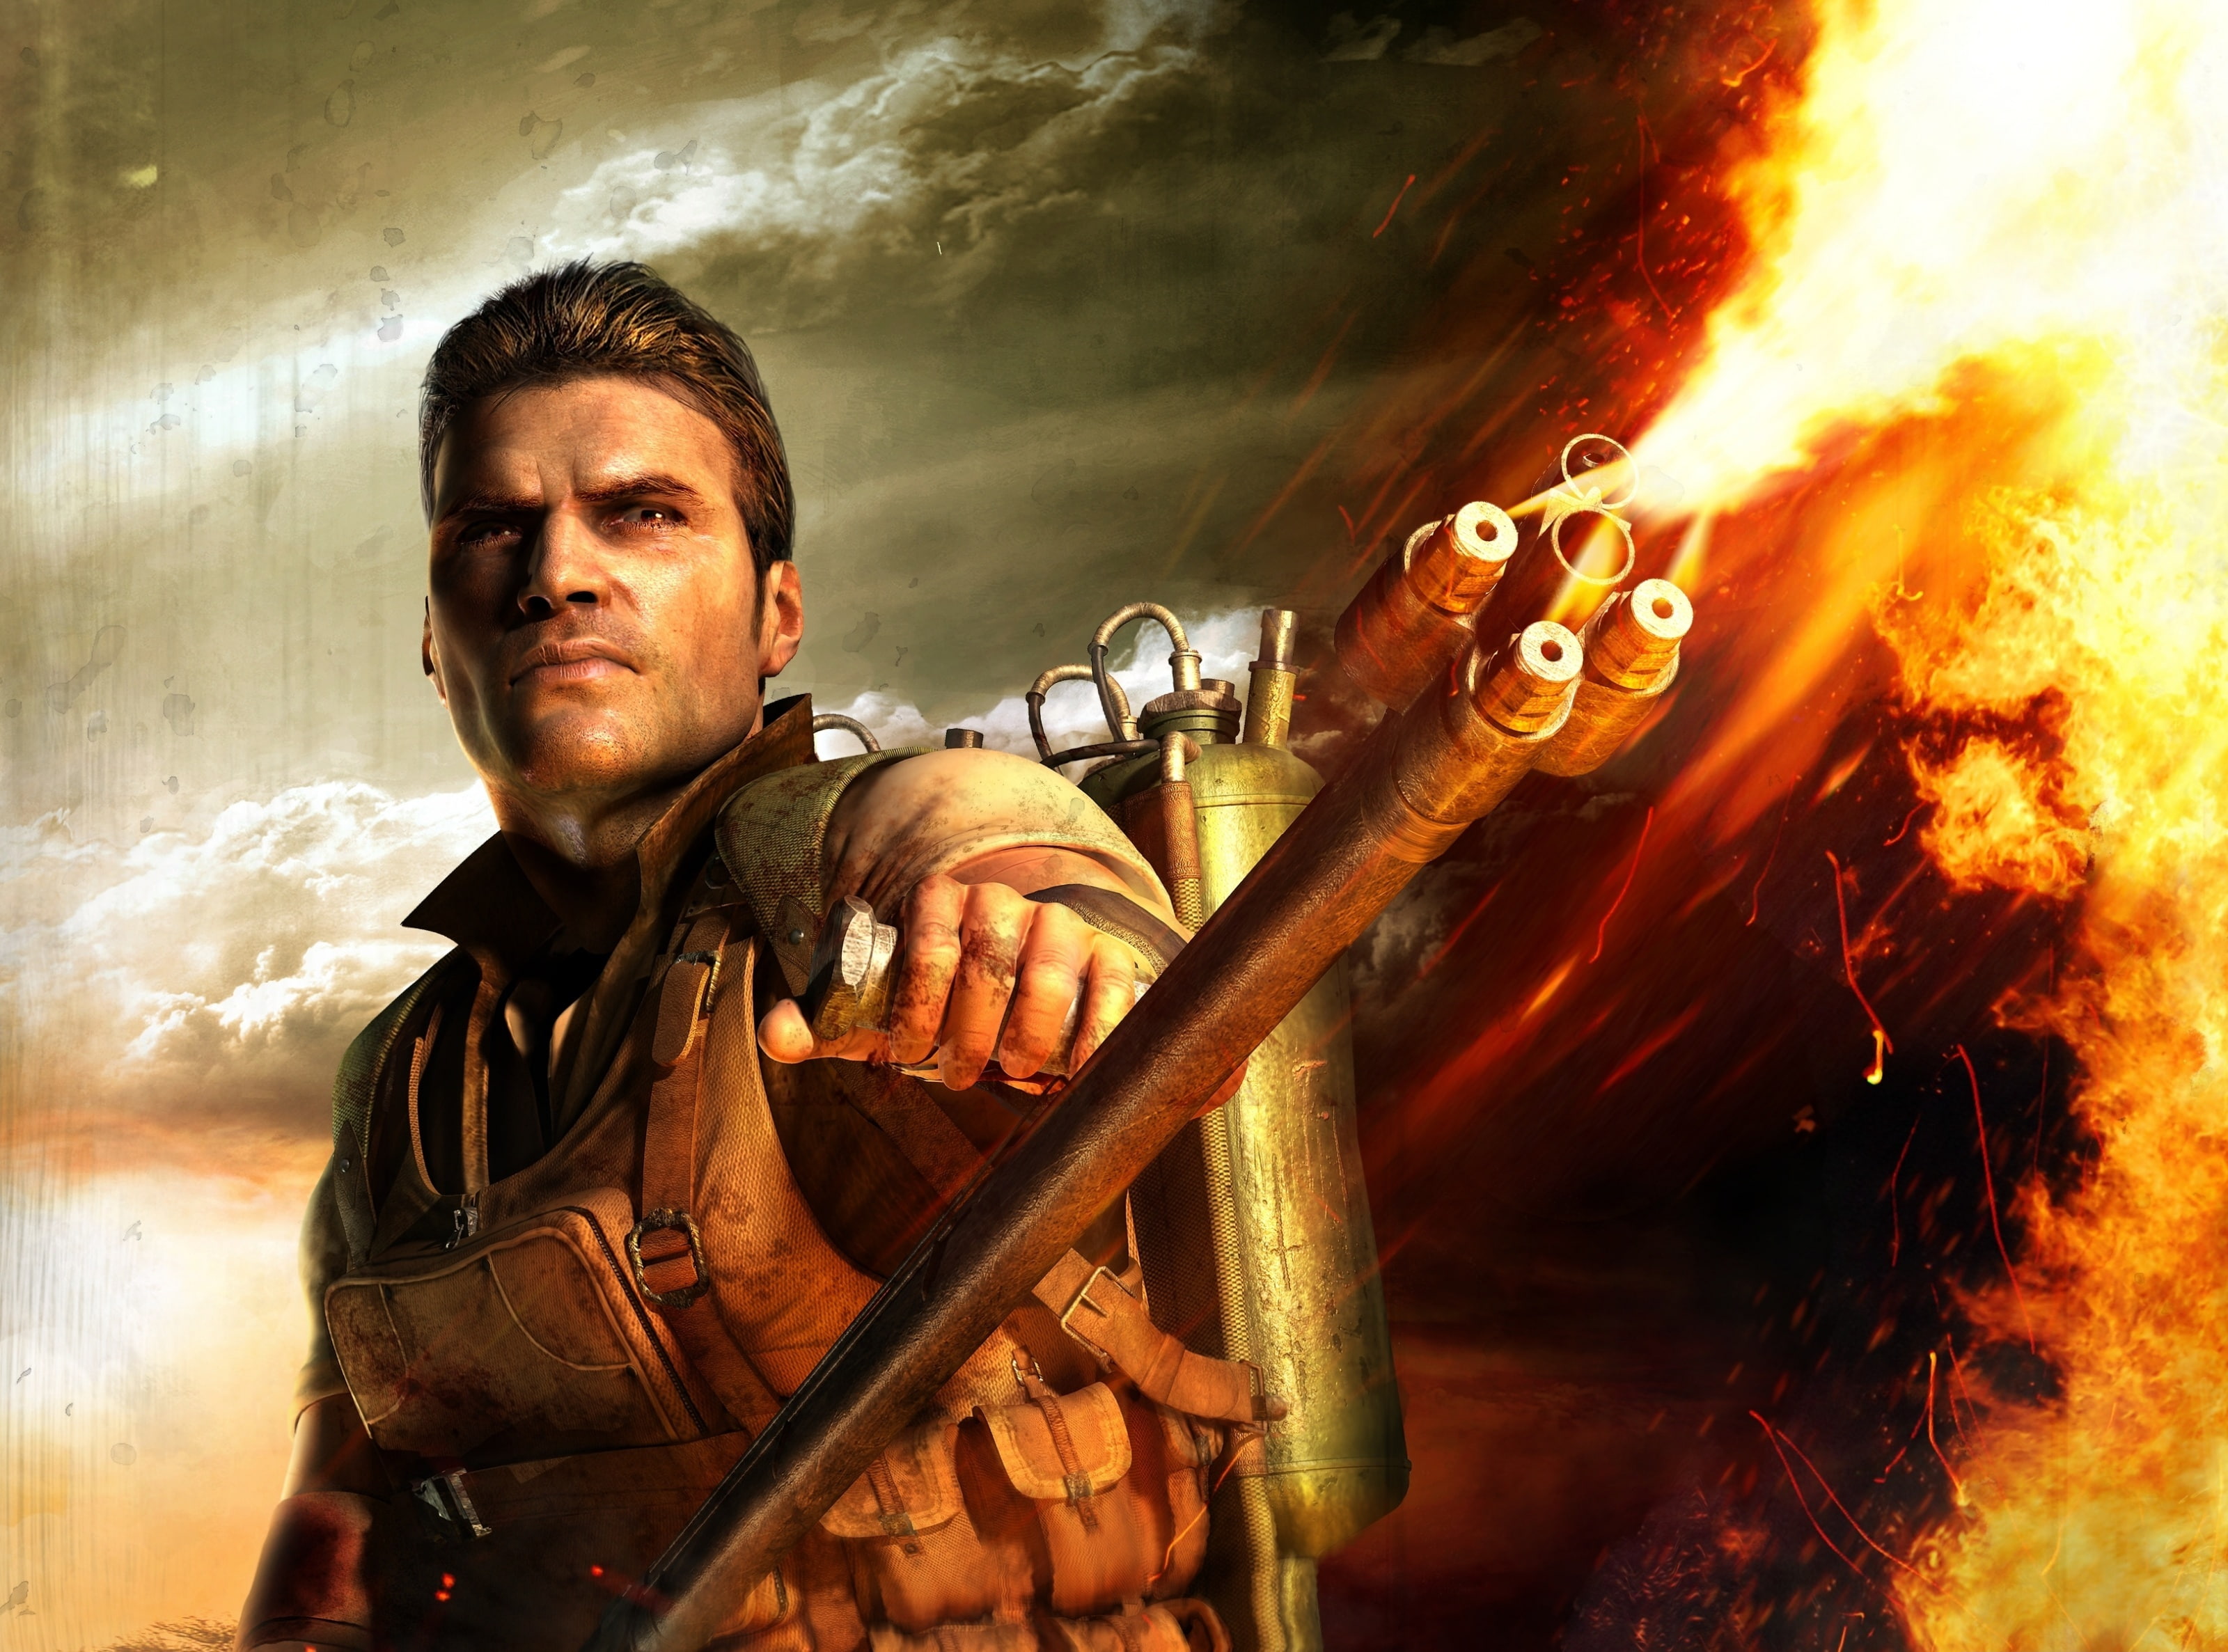 Far Cry 2 Flamethrower, man holding flaming weapon wallpaper